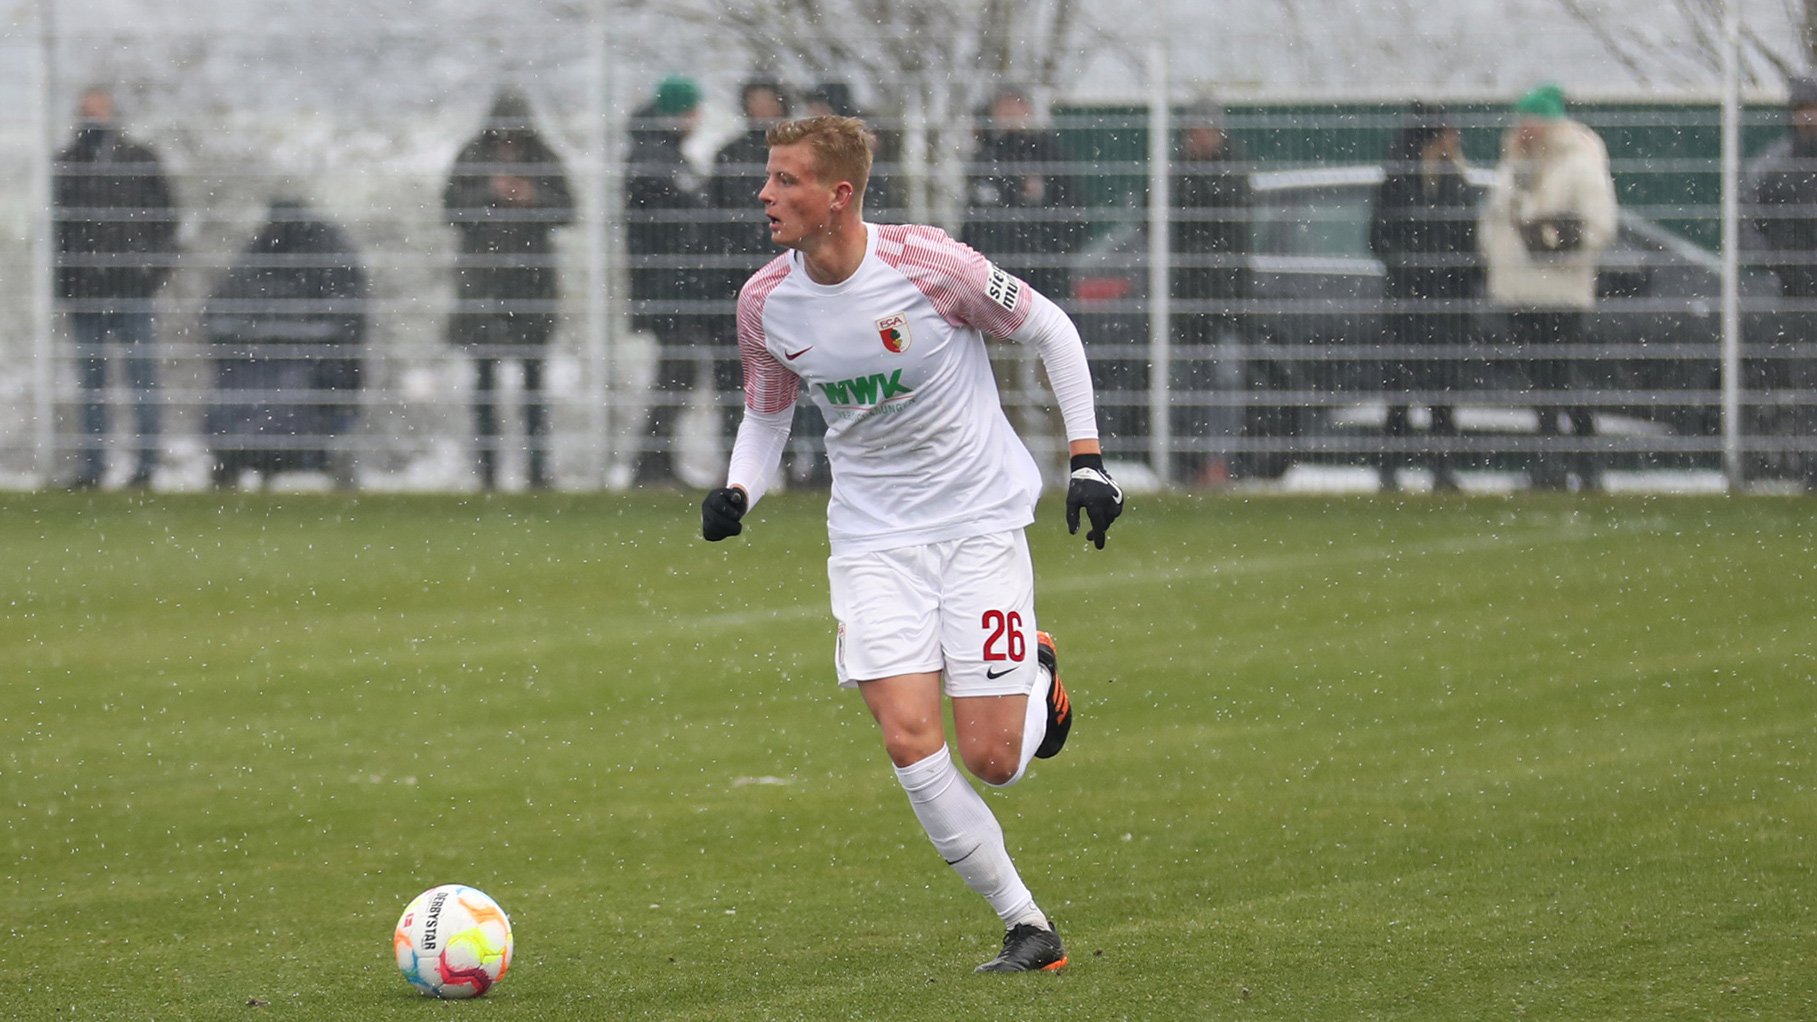 Frederik Winther returns to Denmark on loan | FC Augsburg